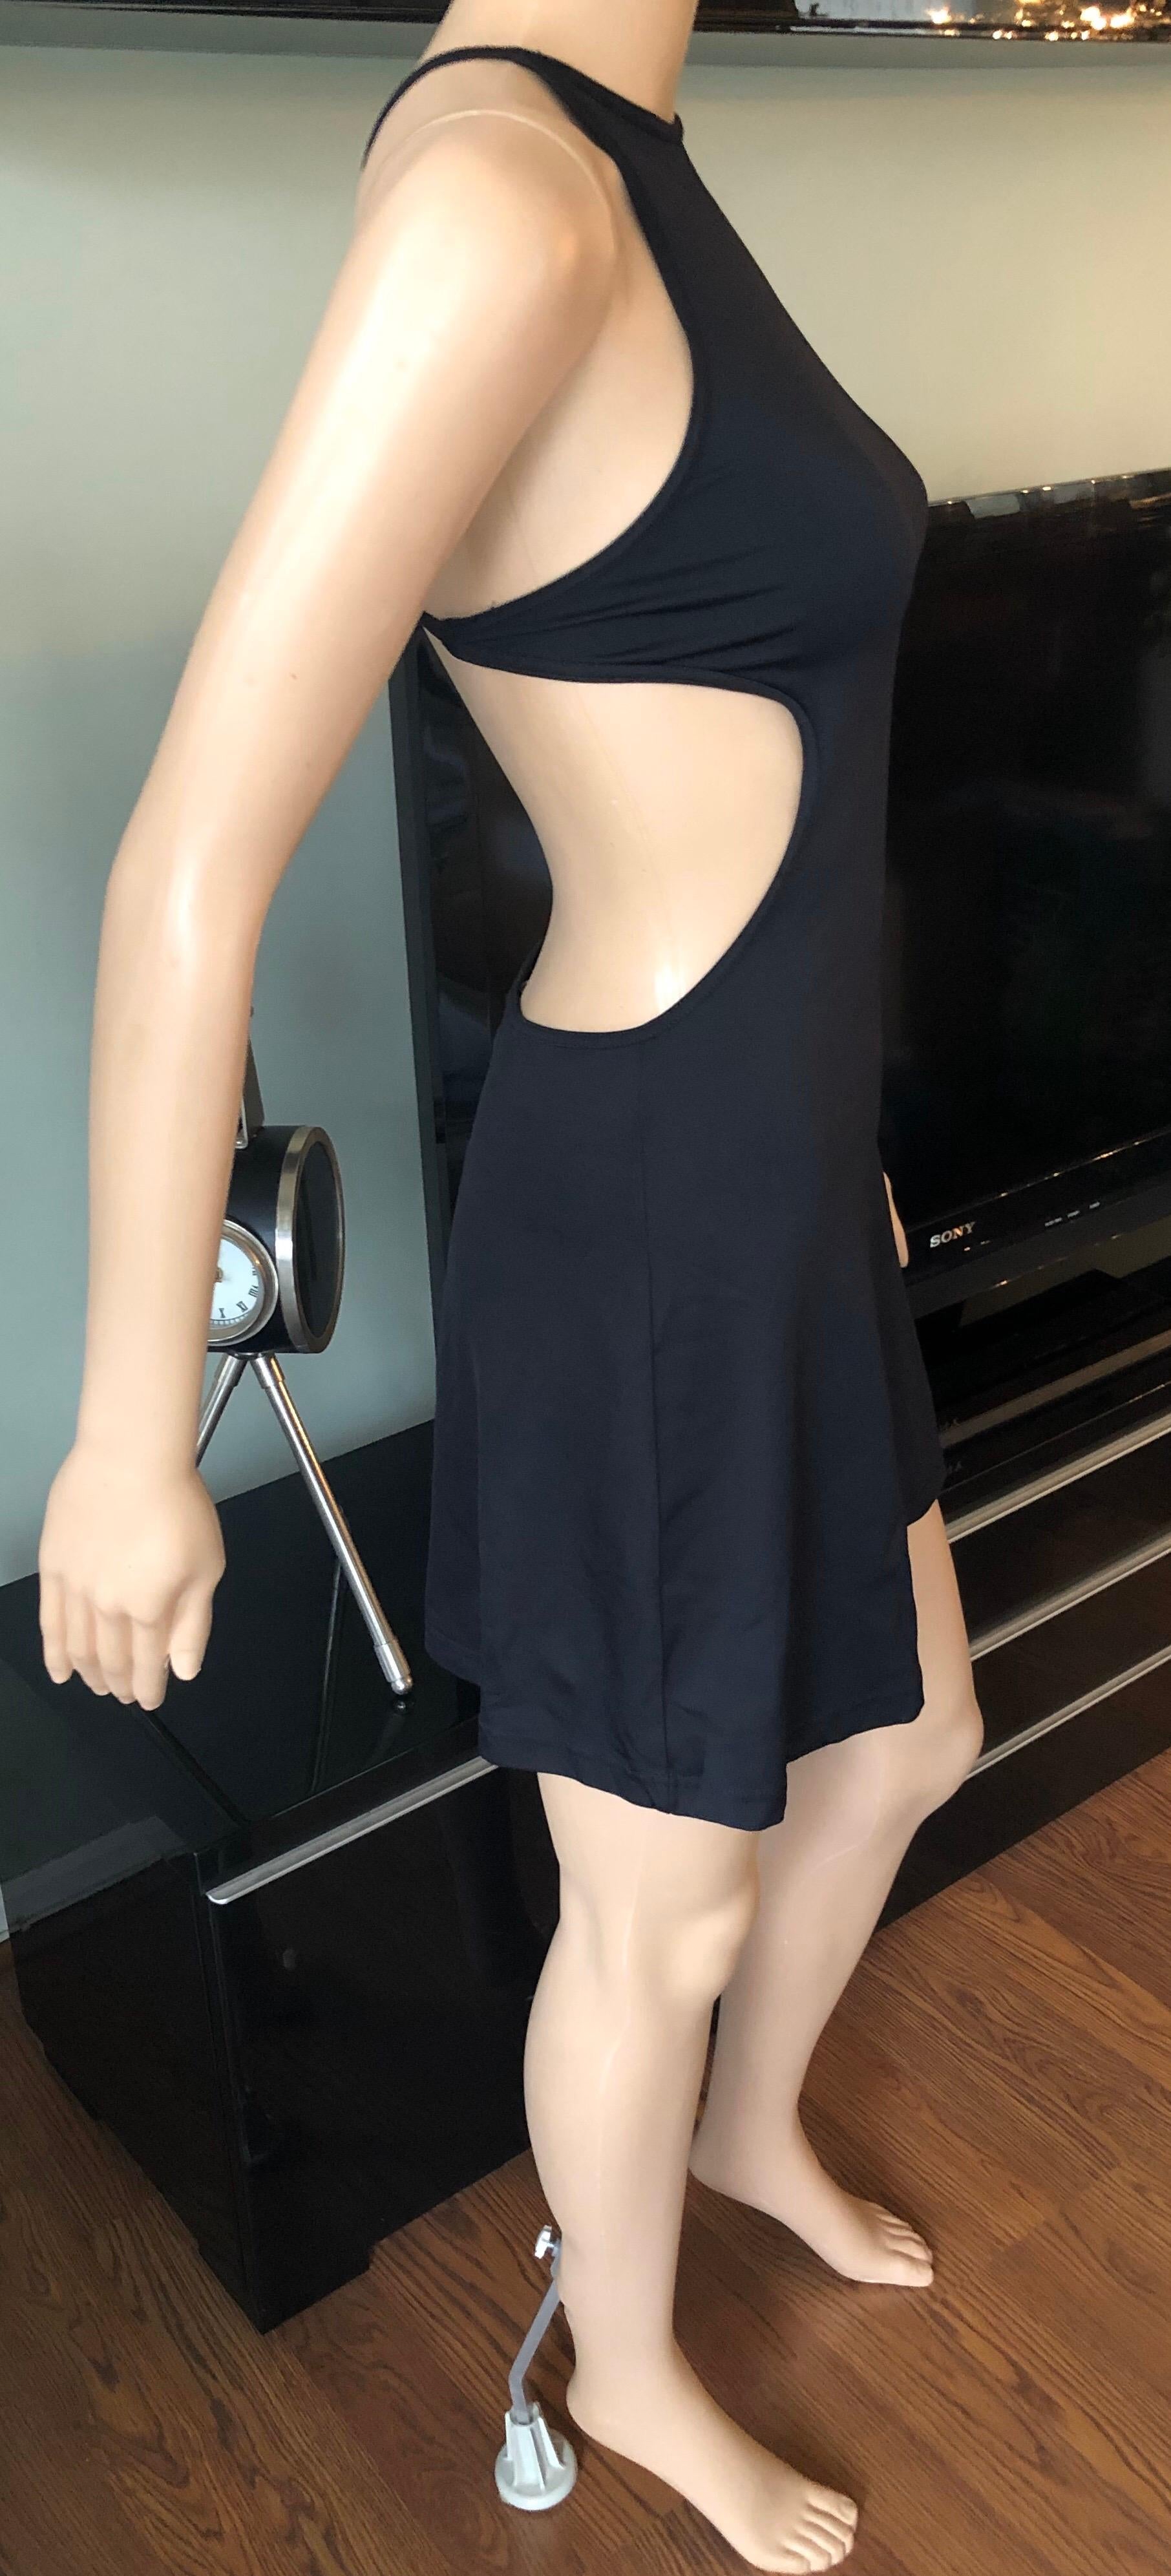 Gianni Versace Intensive Vintage C.1990's Cutout Open Back Black Mini Dress IT 42

Versace Intensive vintage mini stretchy dress featuring halter neckline, cutouts, and open back.
